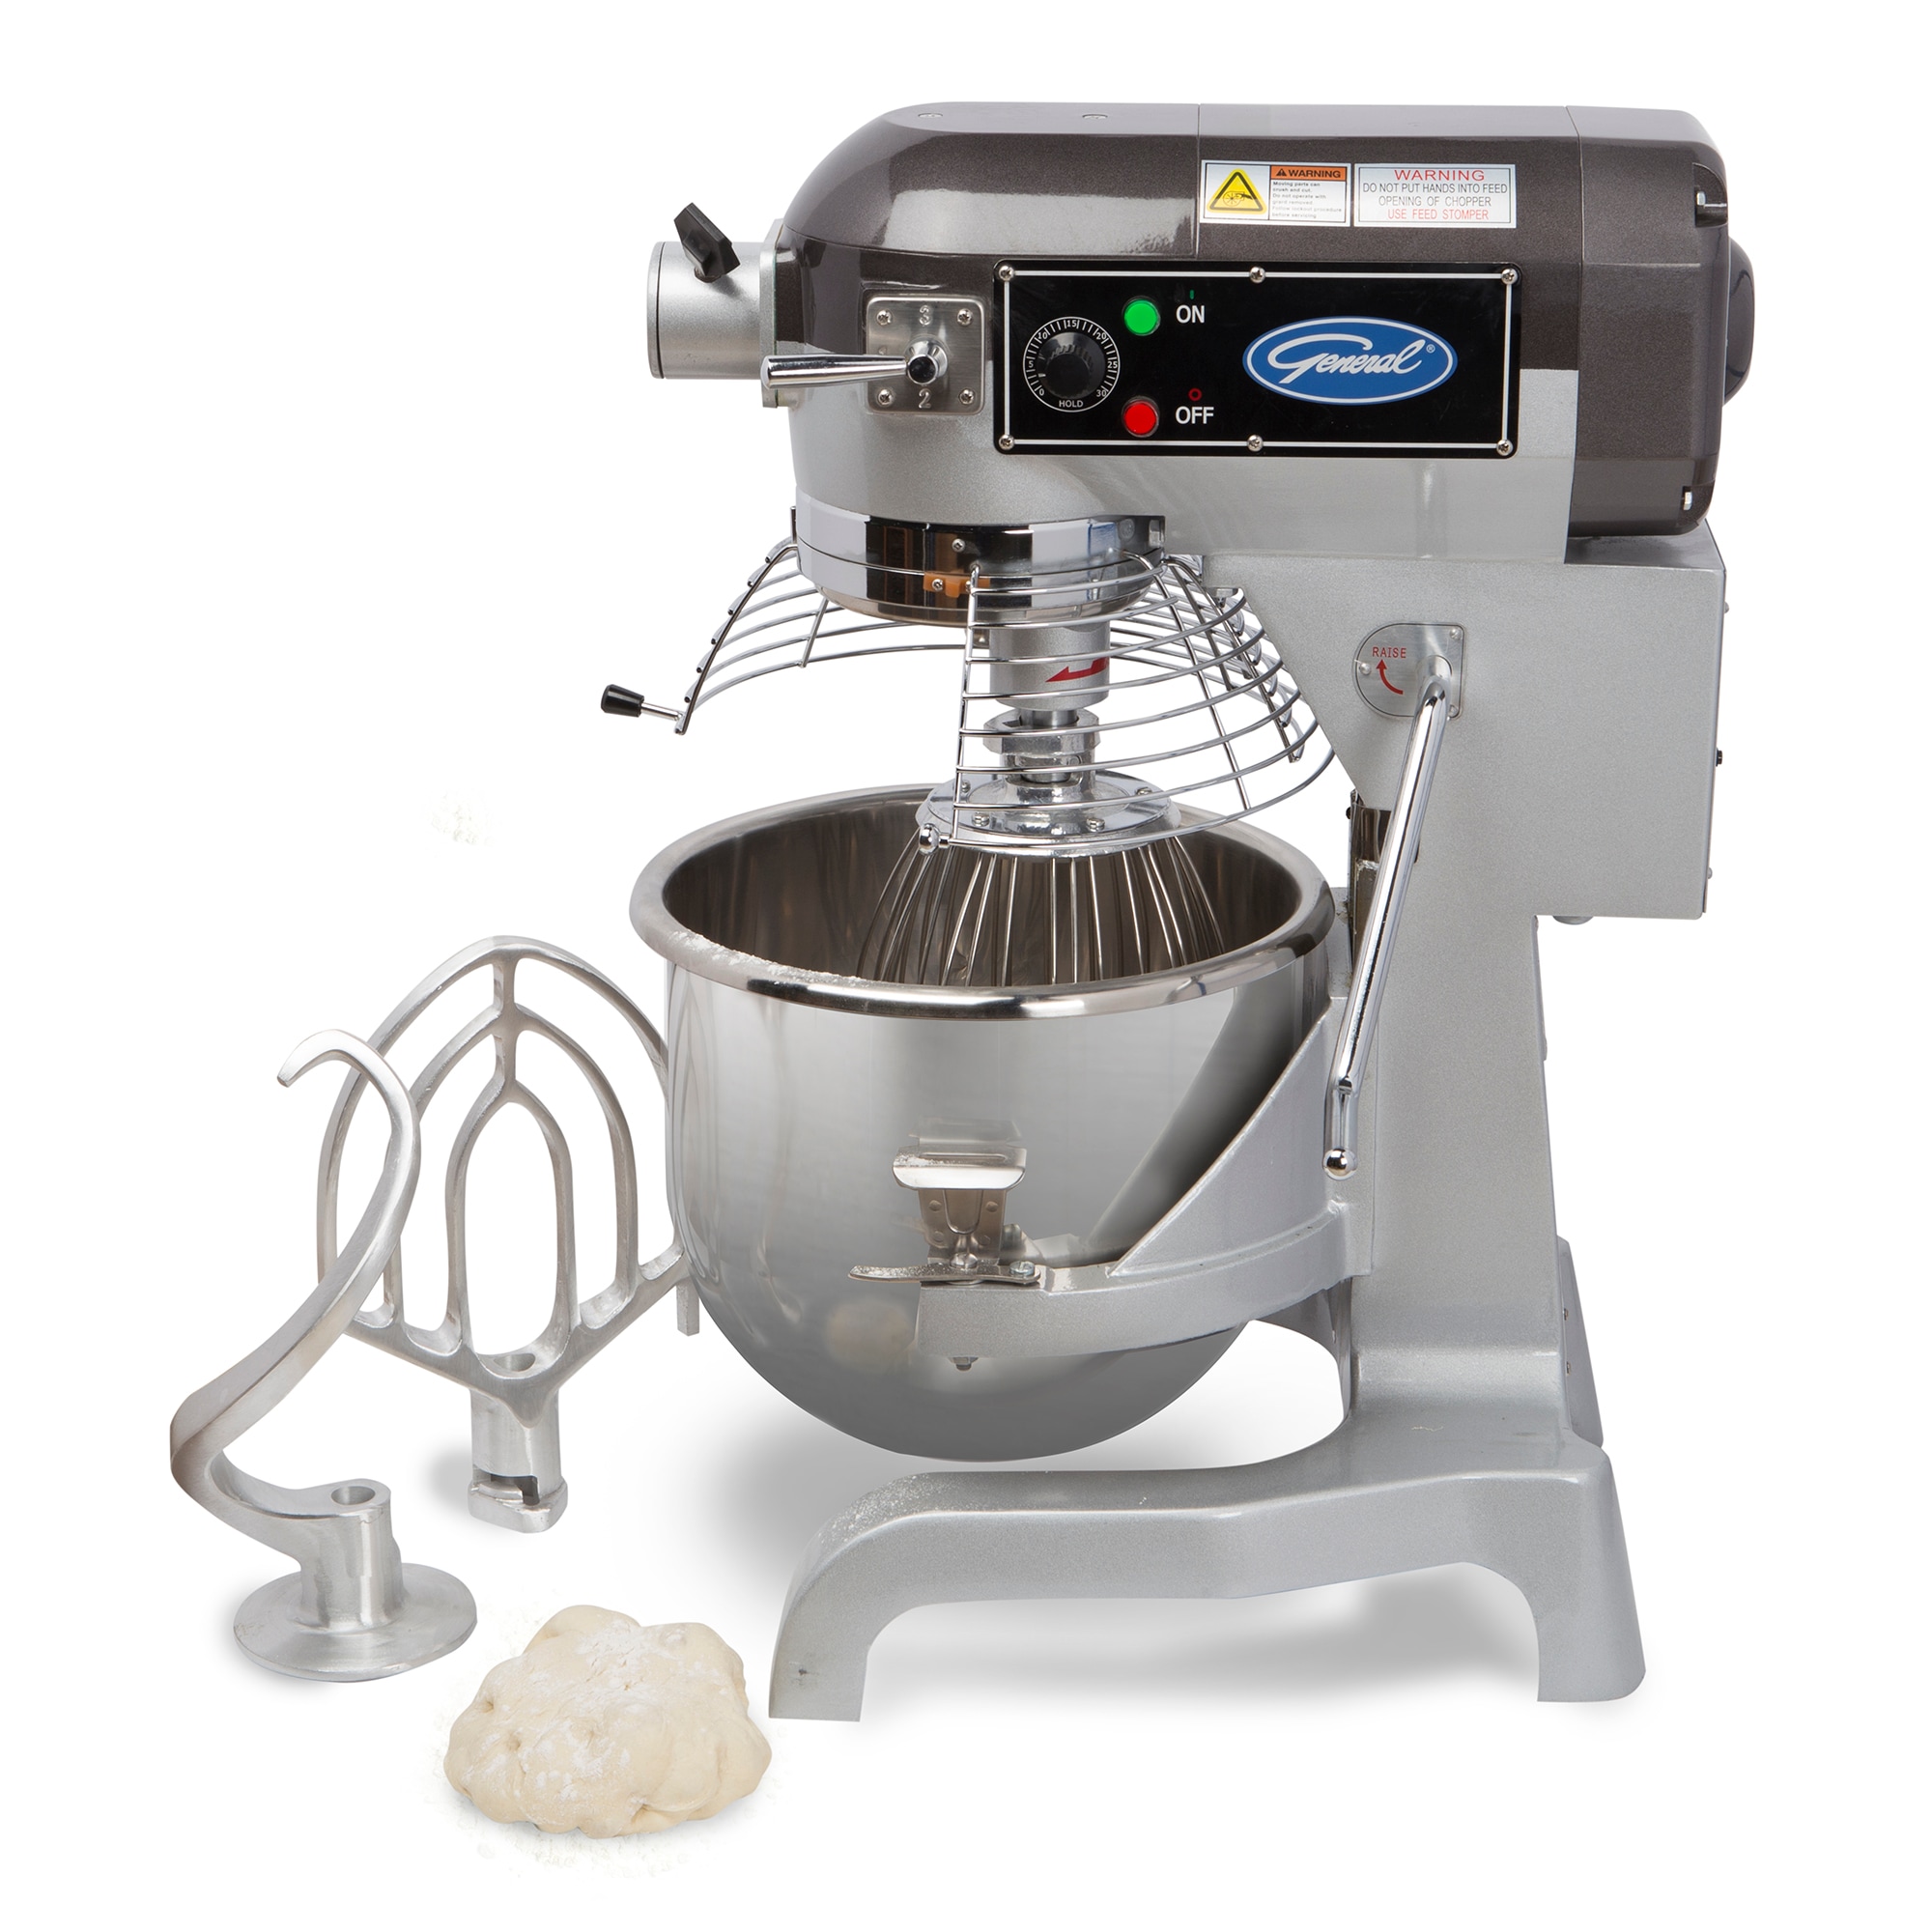 Bolton Tools 20 qt. Commercial PLANETARY Floor Baking Mixer with Guard and Timer Commercial Mixers